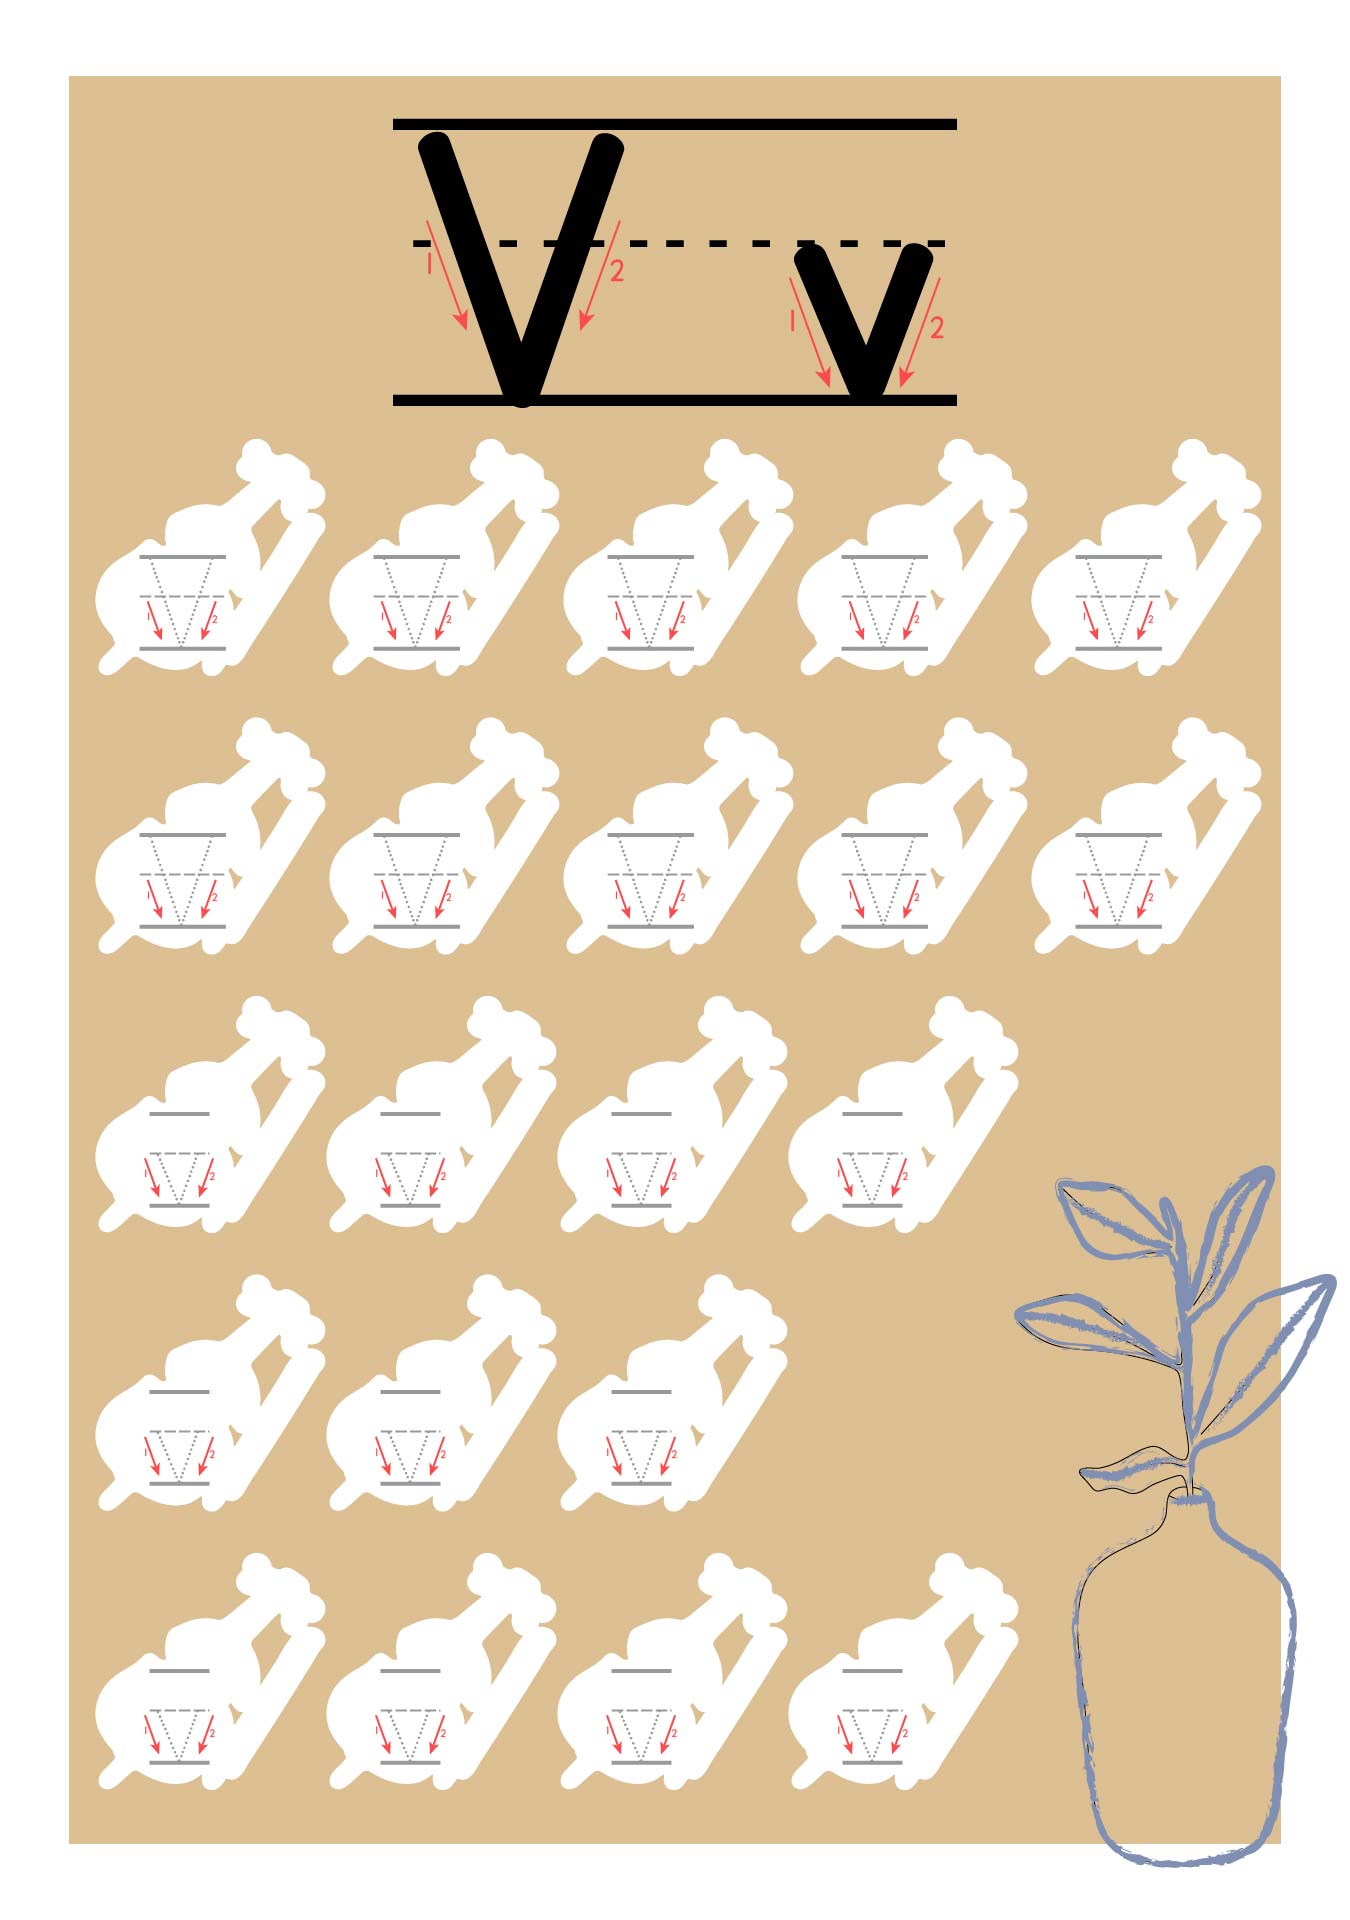 Printable Letter V Tracing Worksheet With Number And Arrow Guides